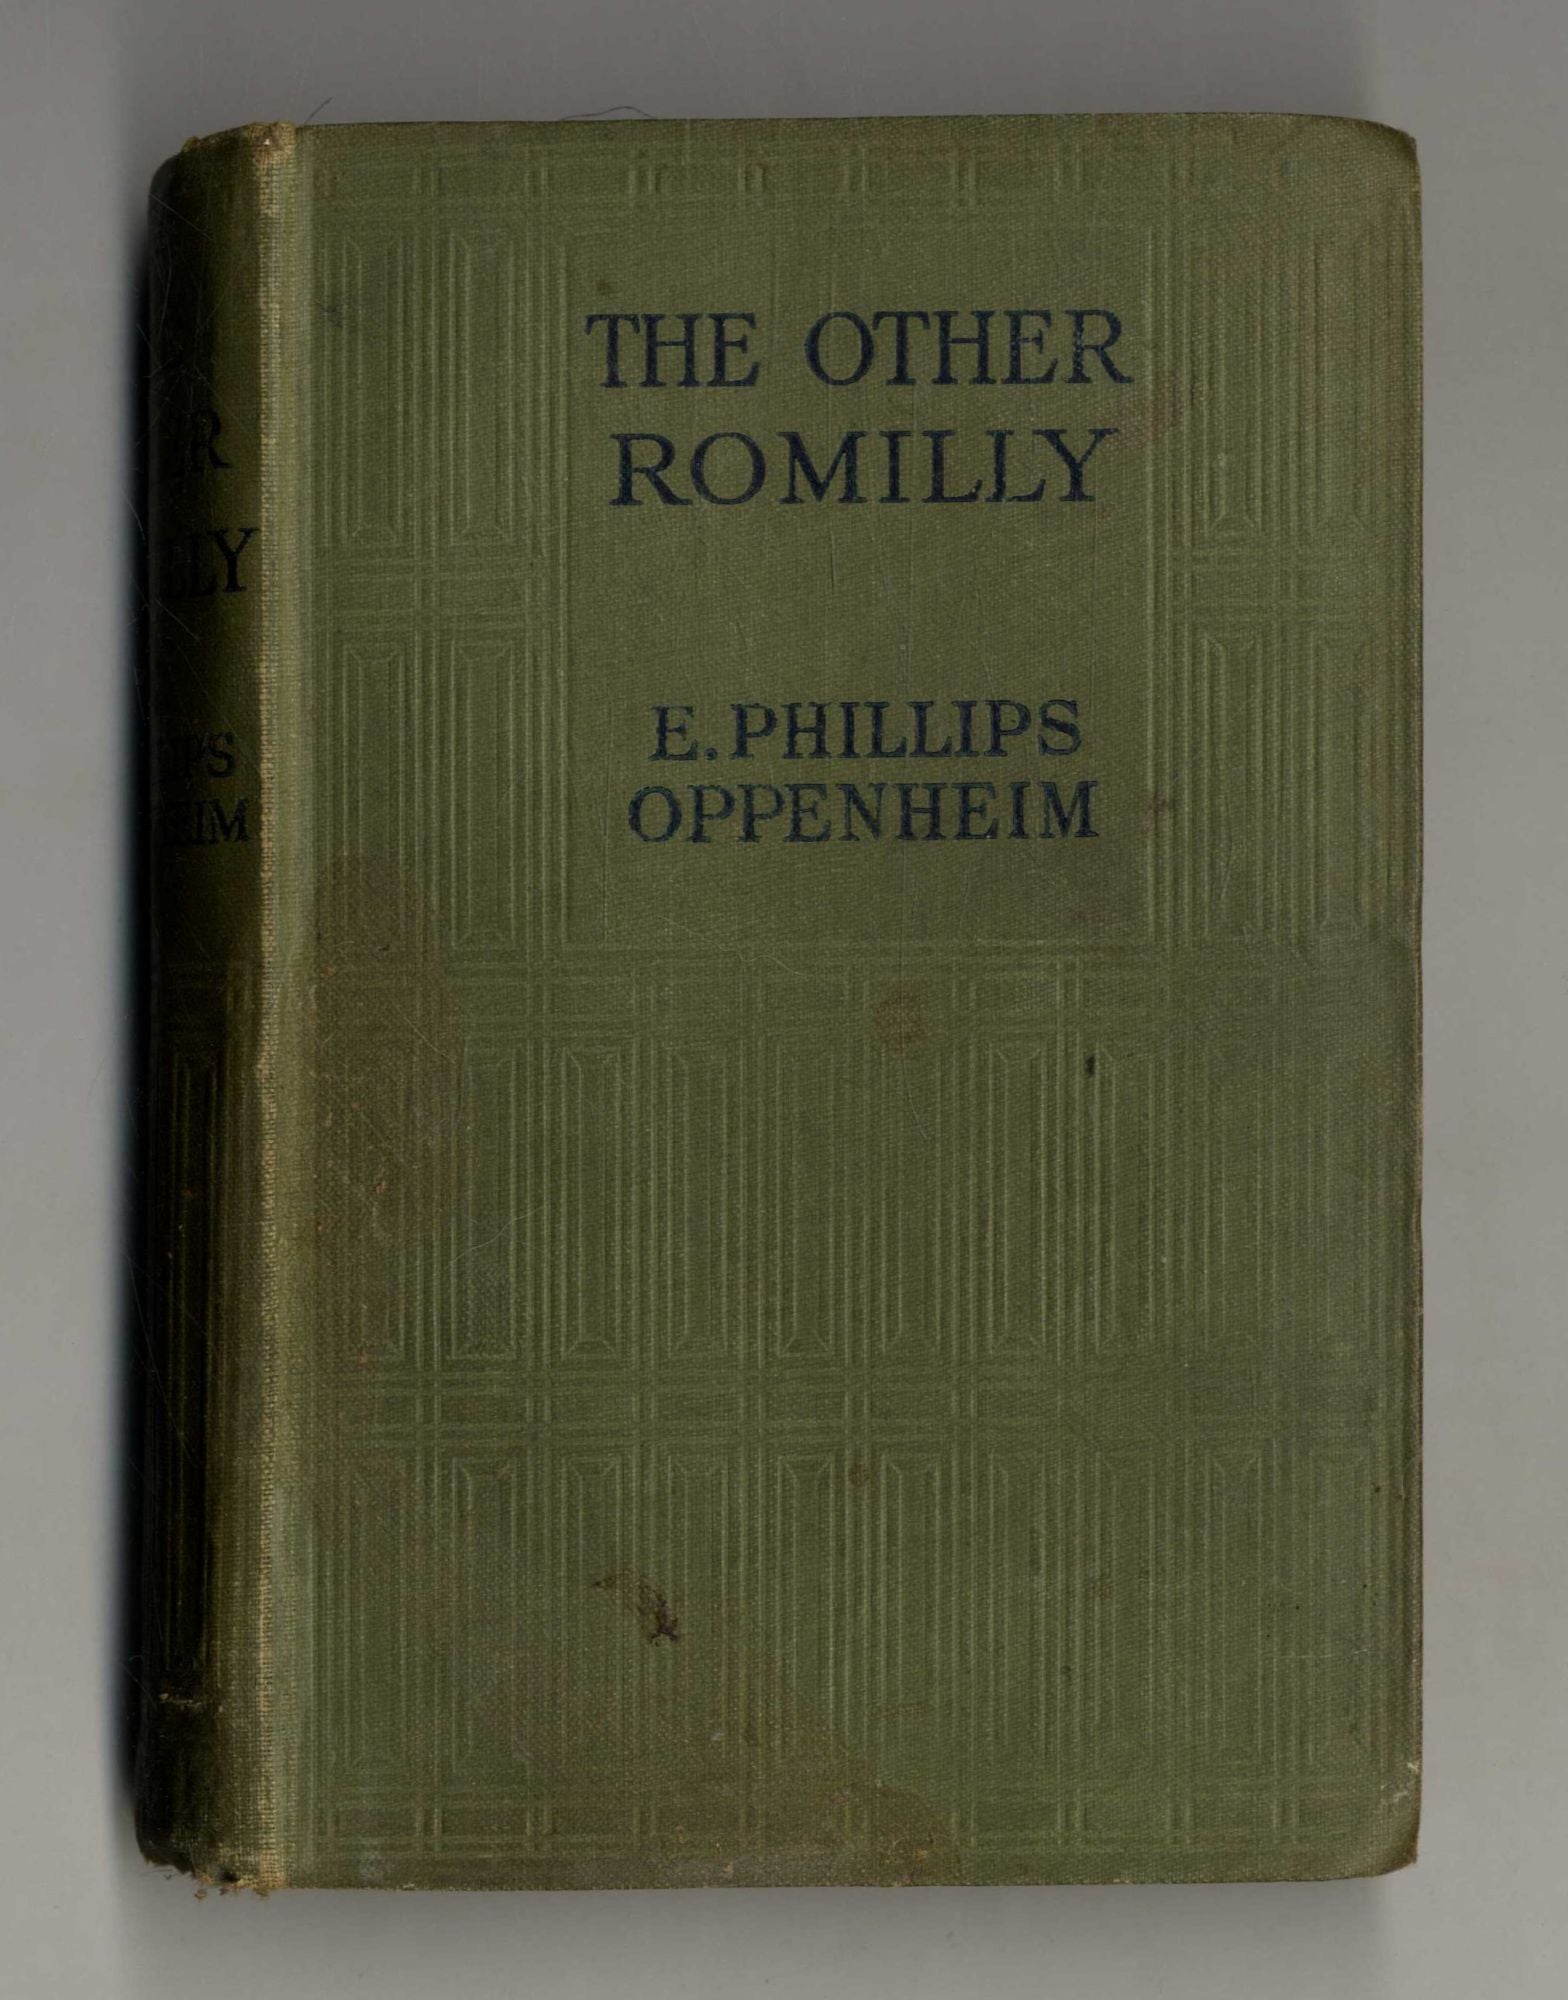 Book #160074 The Other Romilly. E. Phillips Oppenheim.